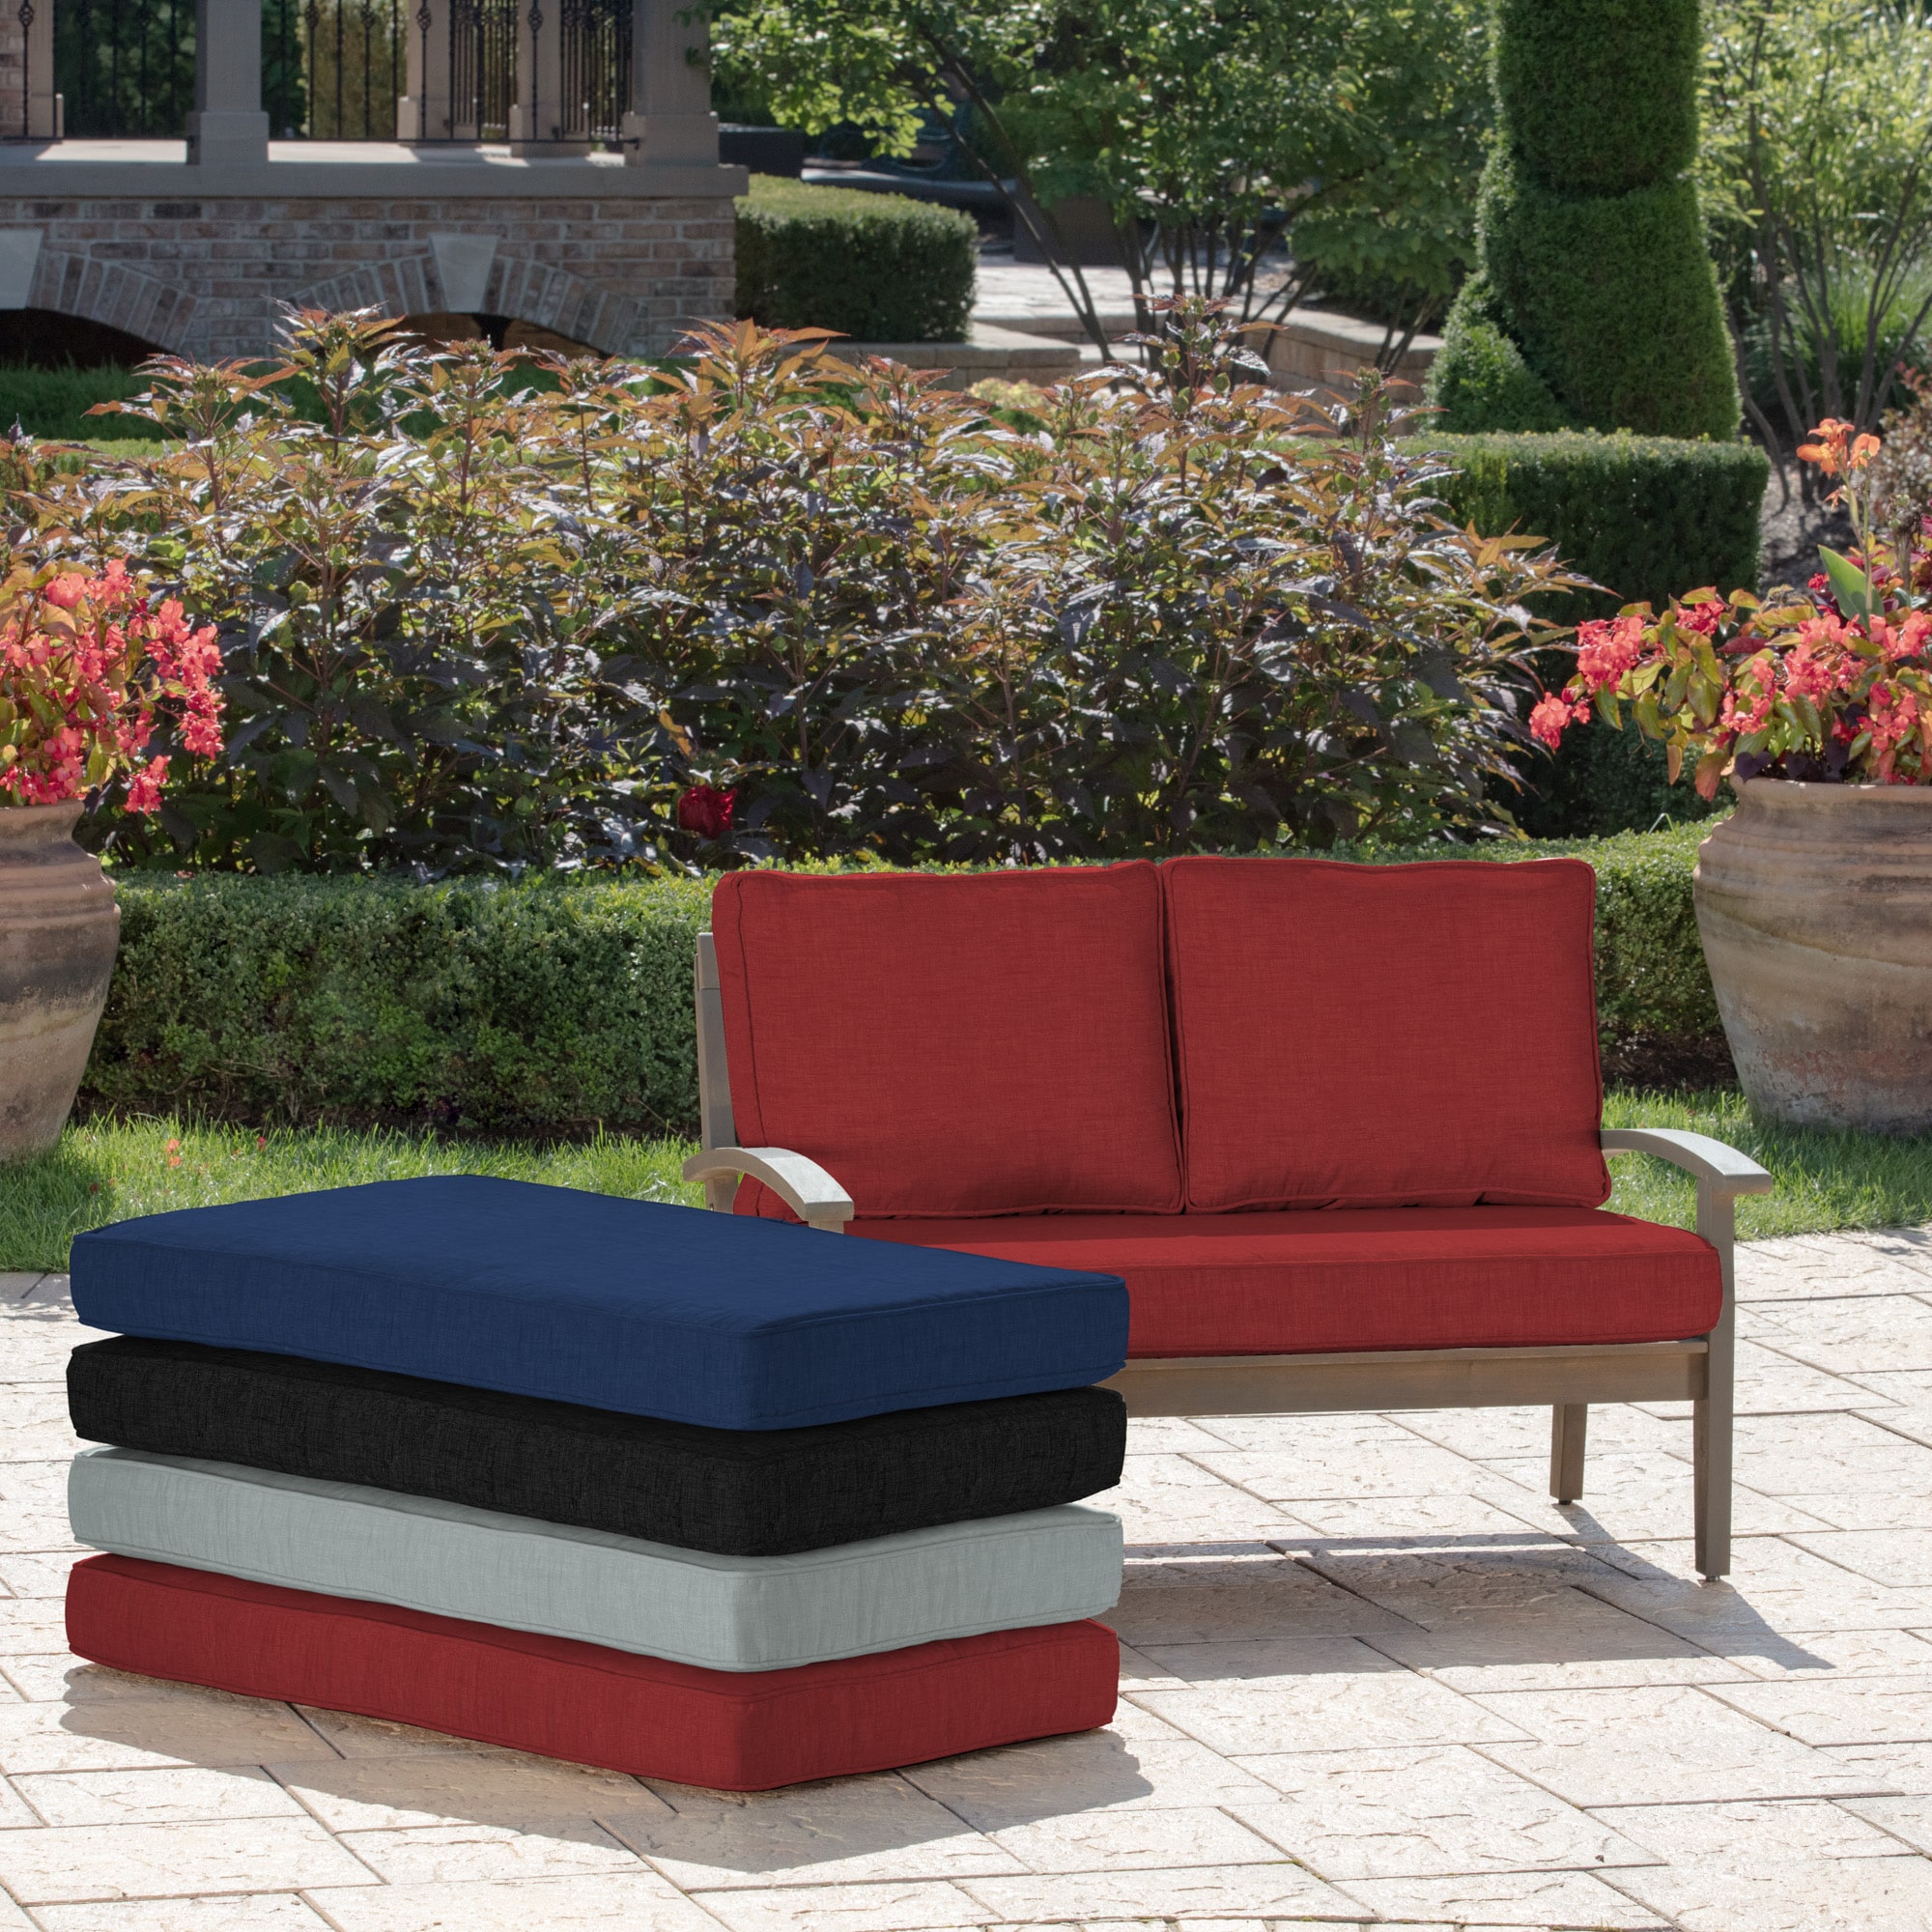 Leala Texture Outdoor Bench Cushion Ruby (Red) - Arden Selections